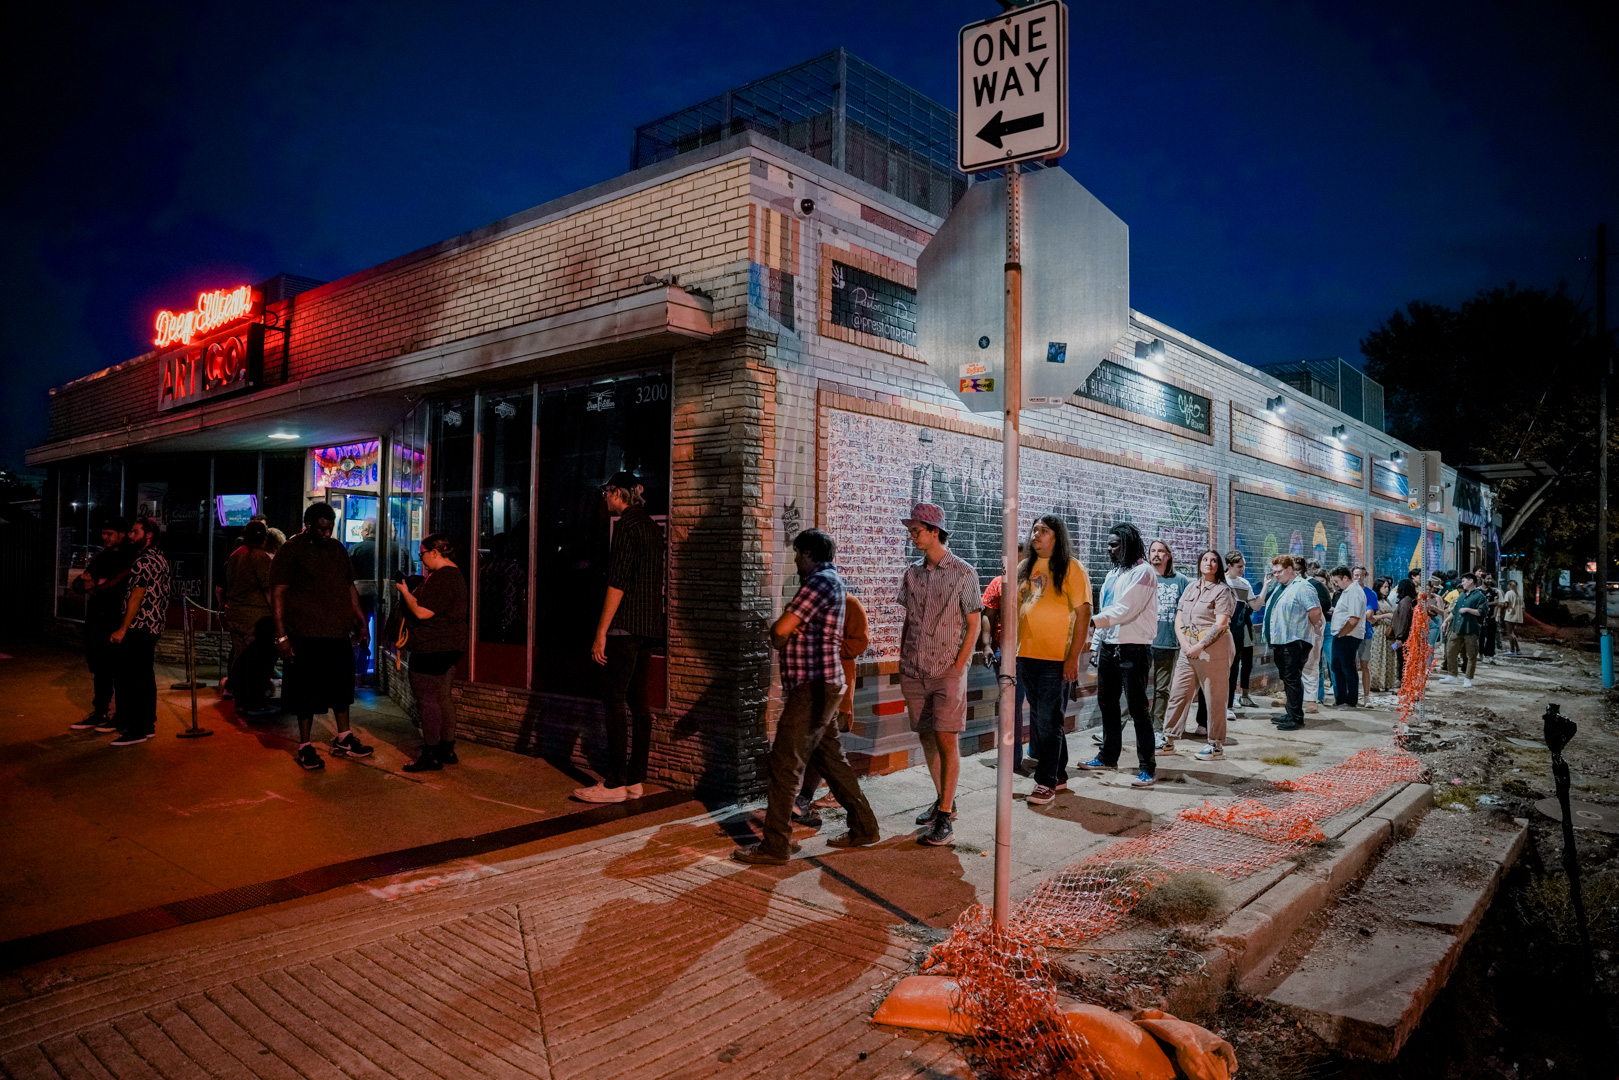 A line of people outside a music venue